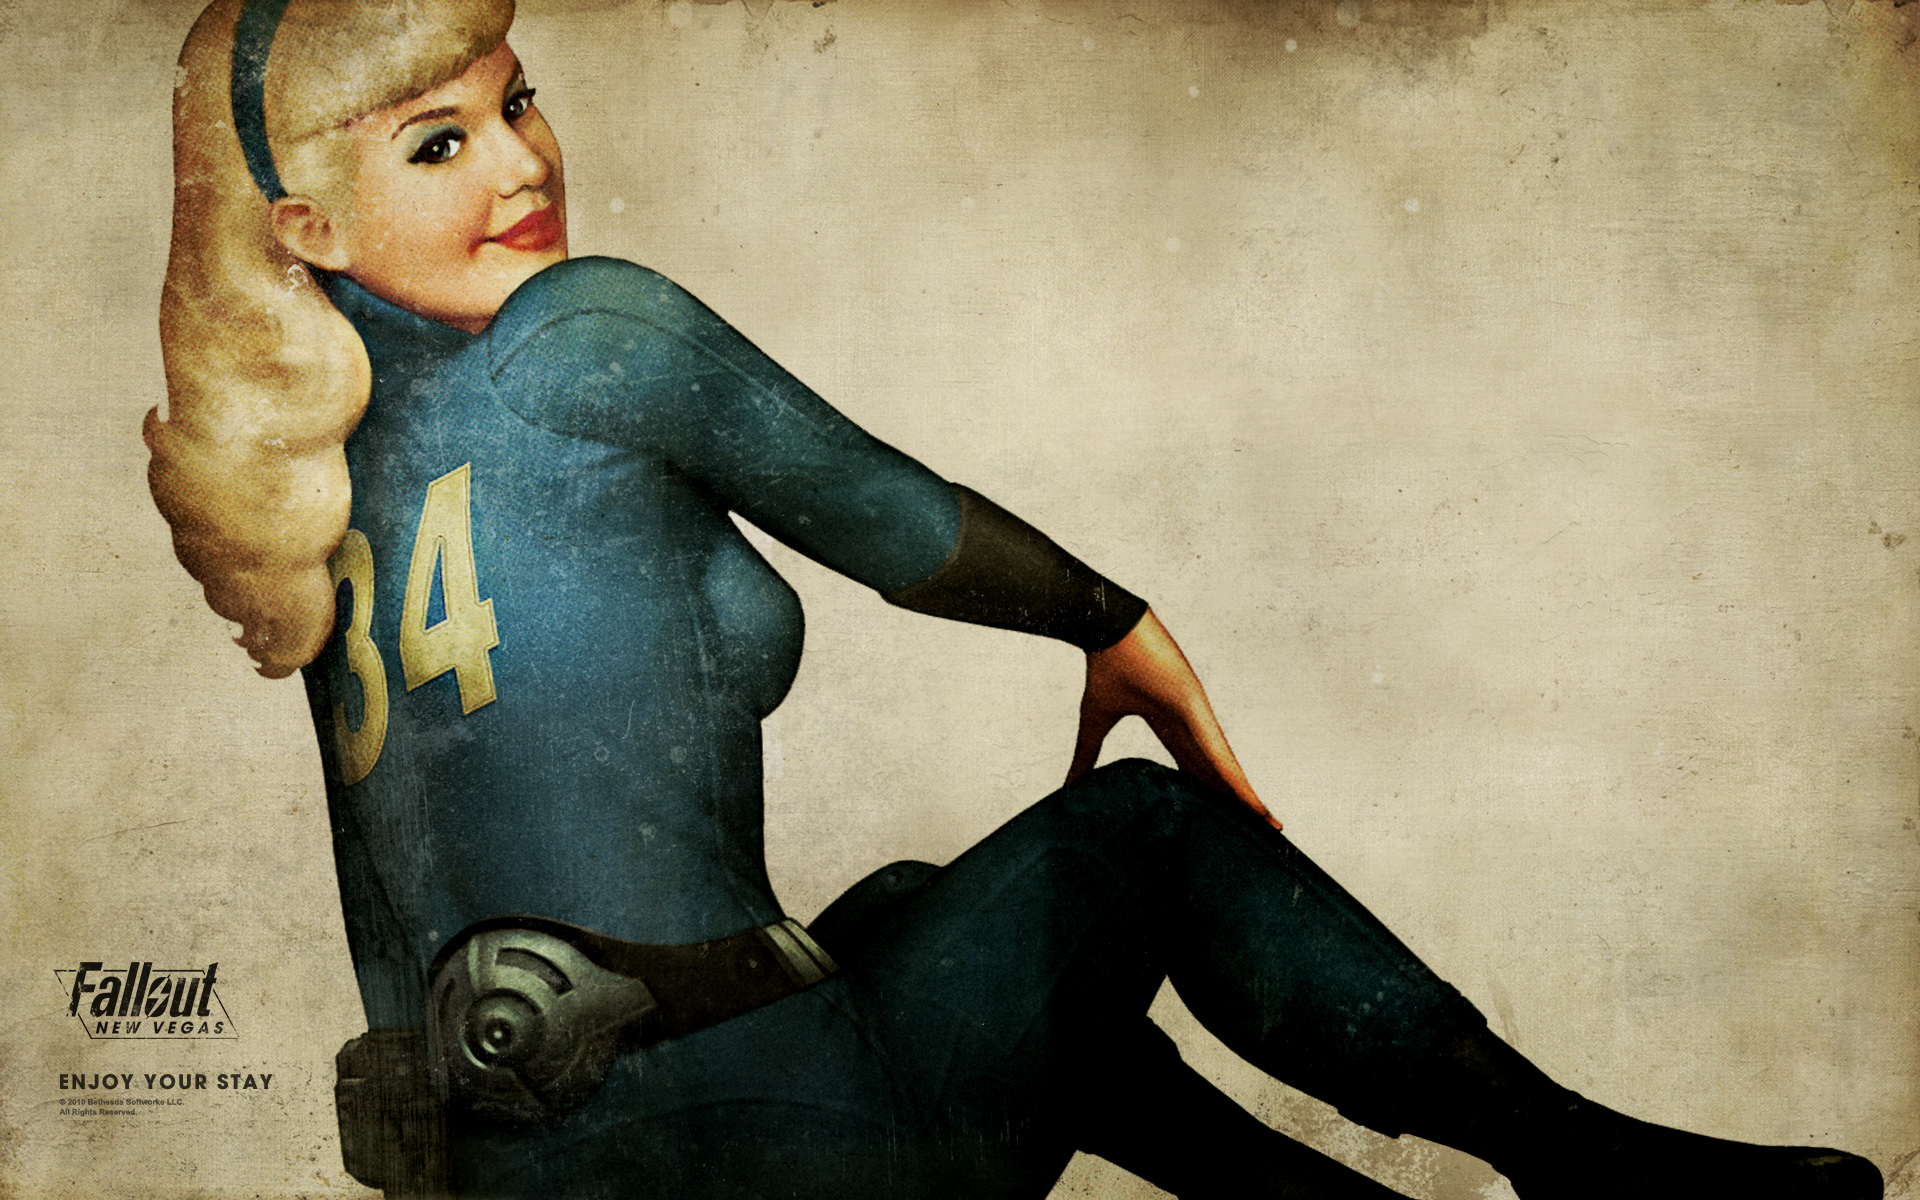 video game, fallout images